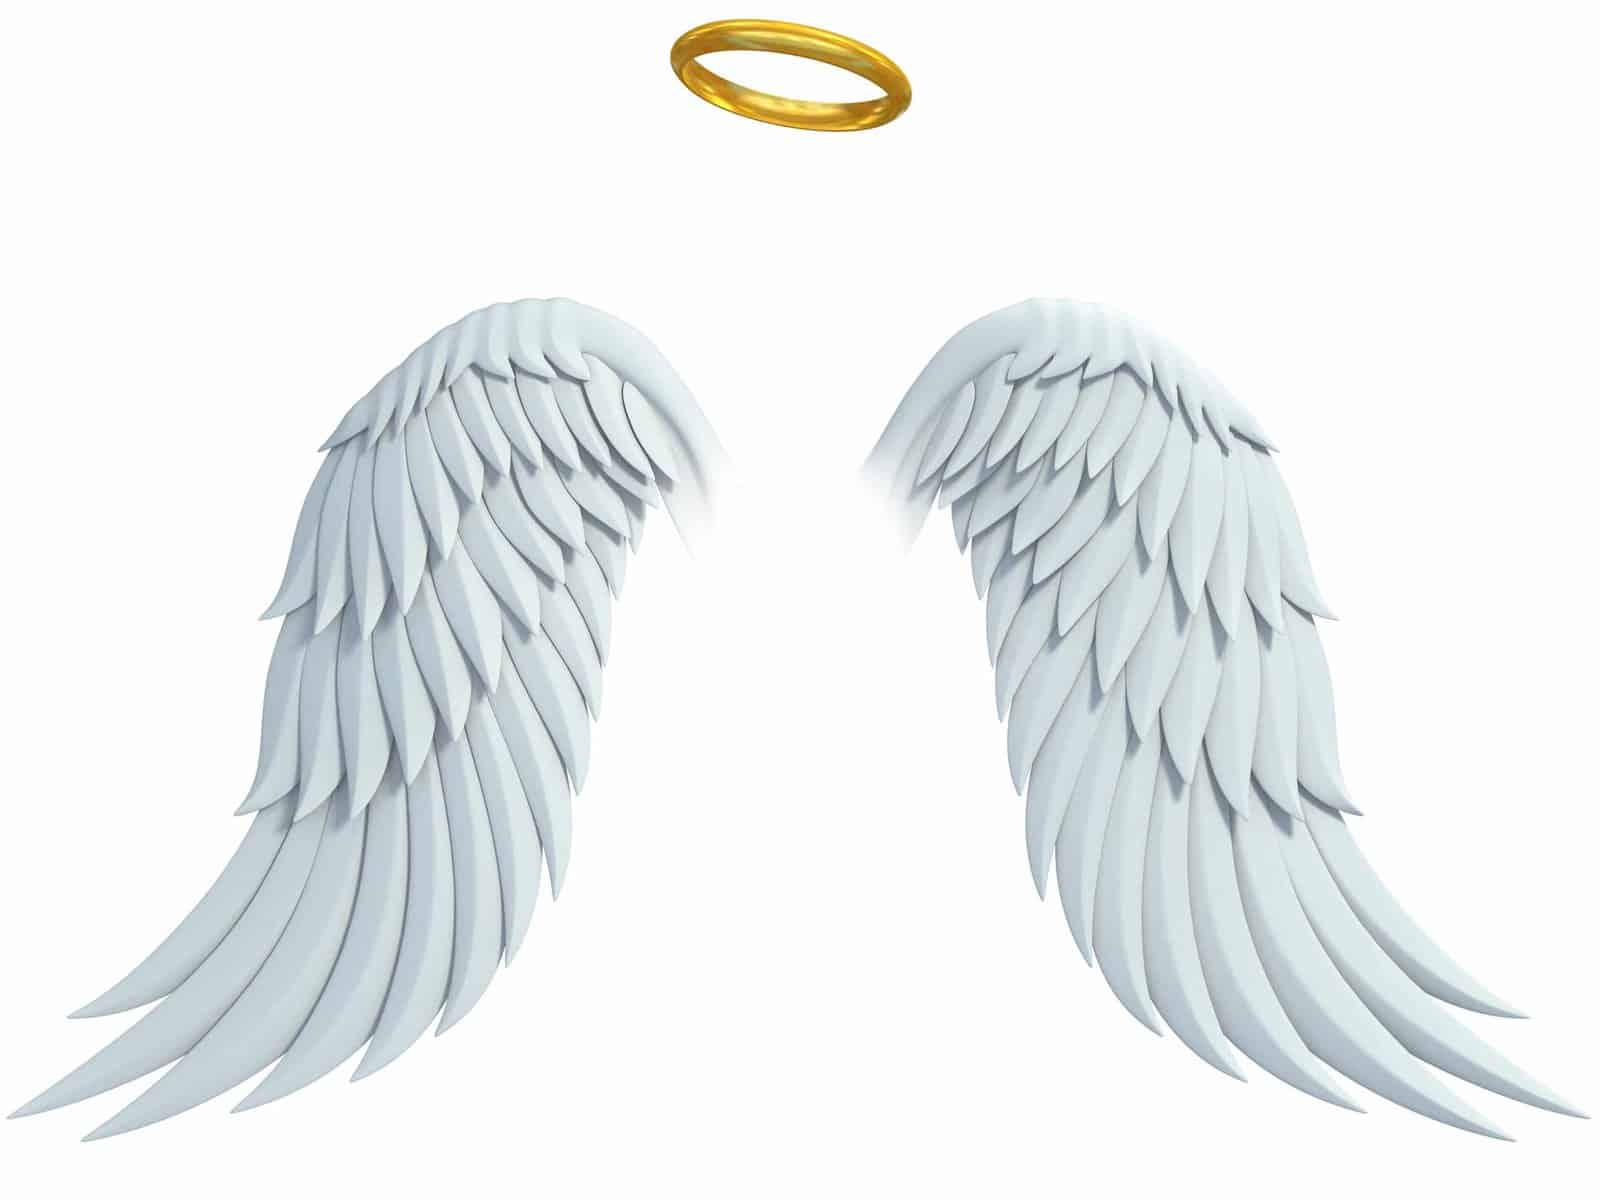 bigstock Angel Design Elements Wings 383414123 1 scaled